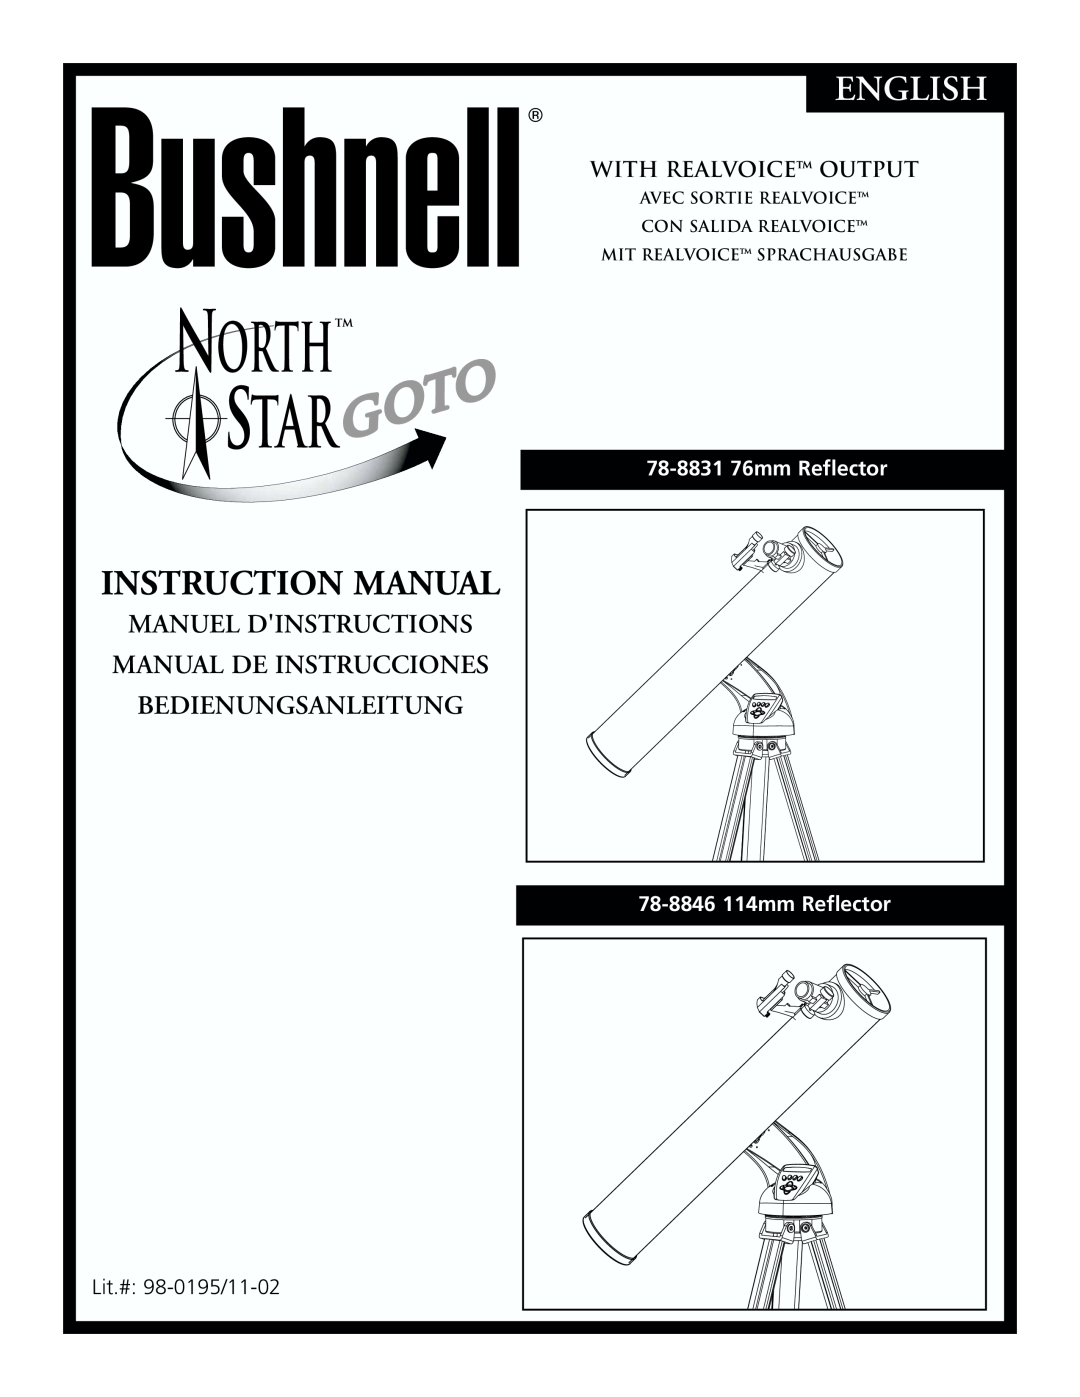 Bushnell 78-8831, 78-8846 instruction manual English, Instruction Manual, With Realvoice Output, 78-883176mm Reflector 